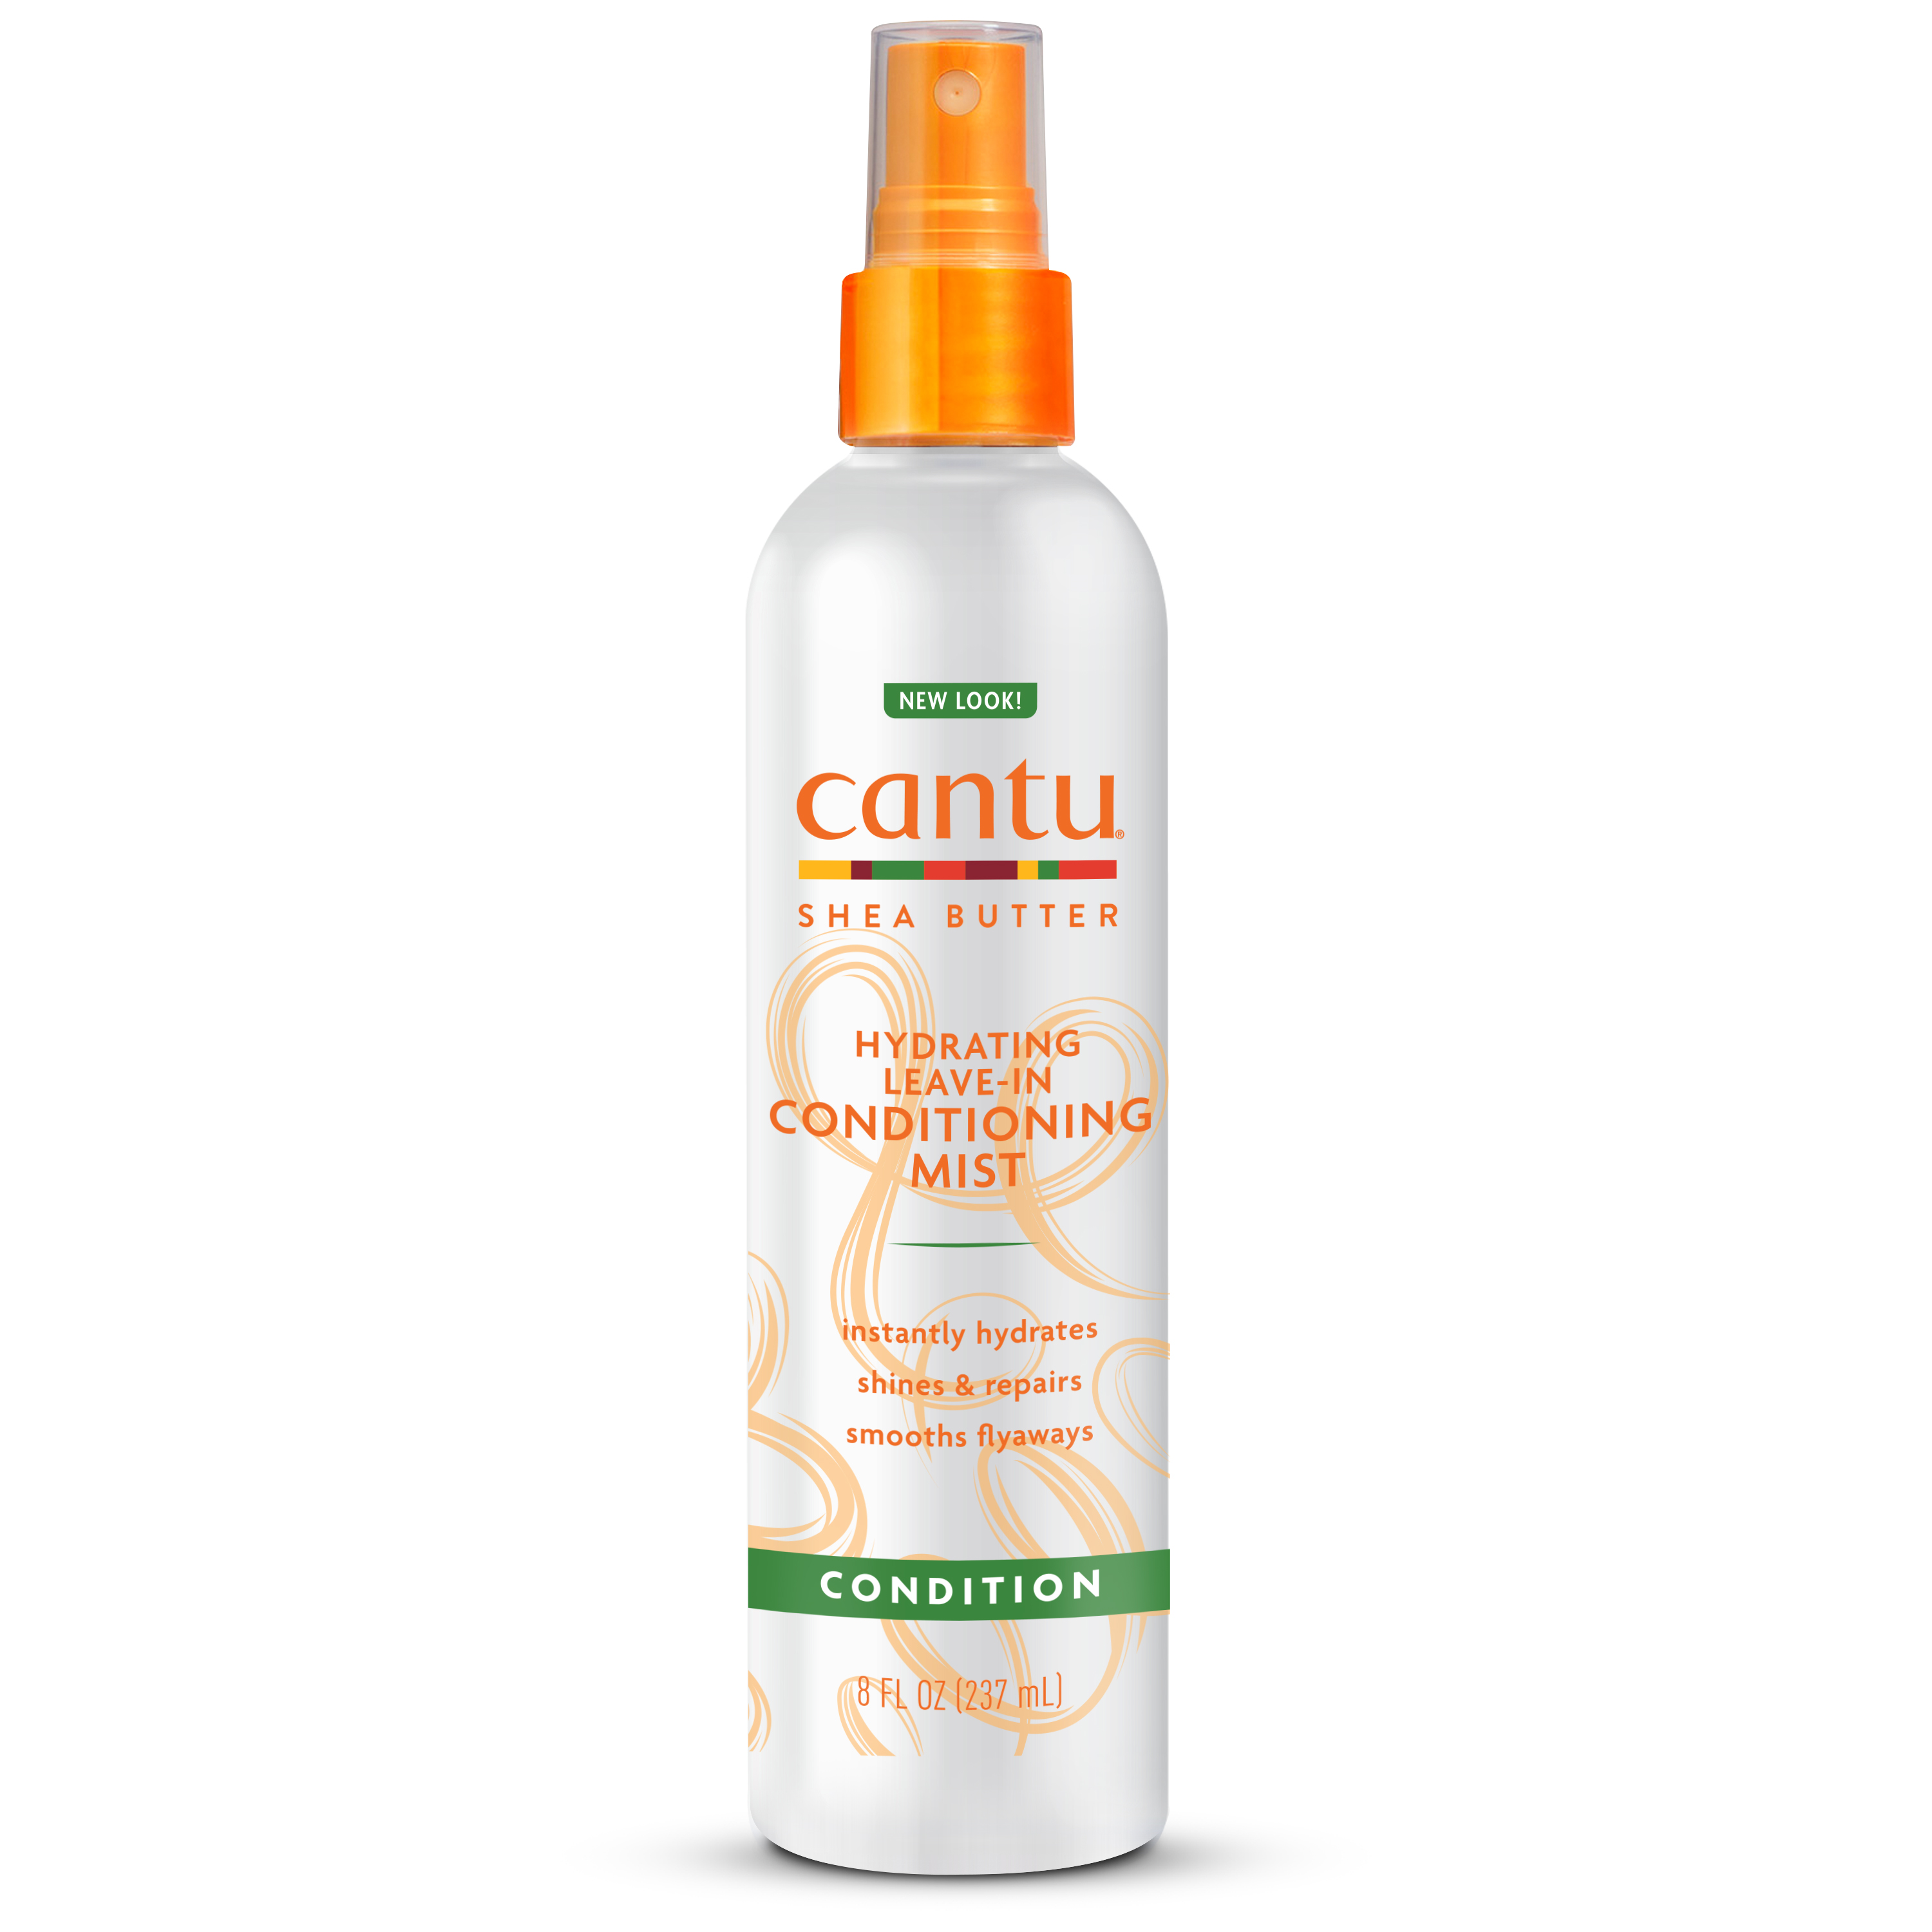 Cantu Shea Butter Leave-in Conditioning Mist with Castor & Argan Oil, 8 fl oz - image 1 of 14